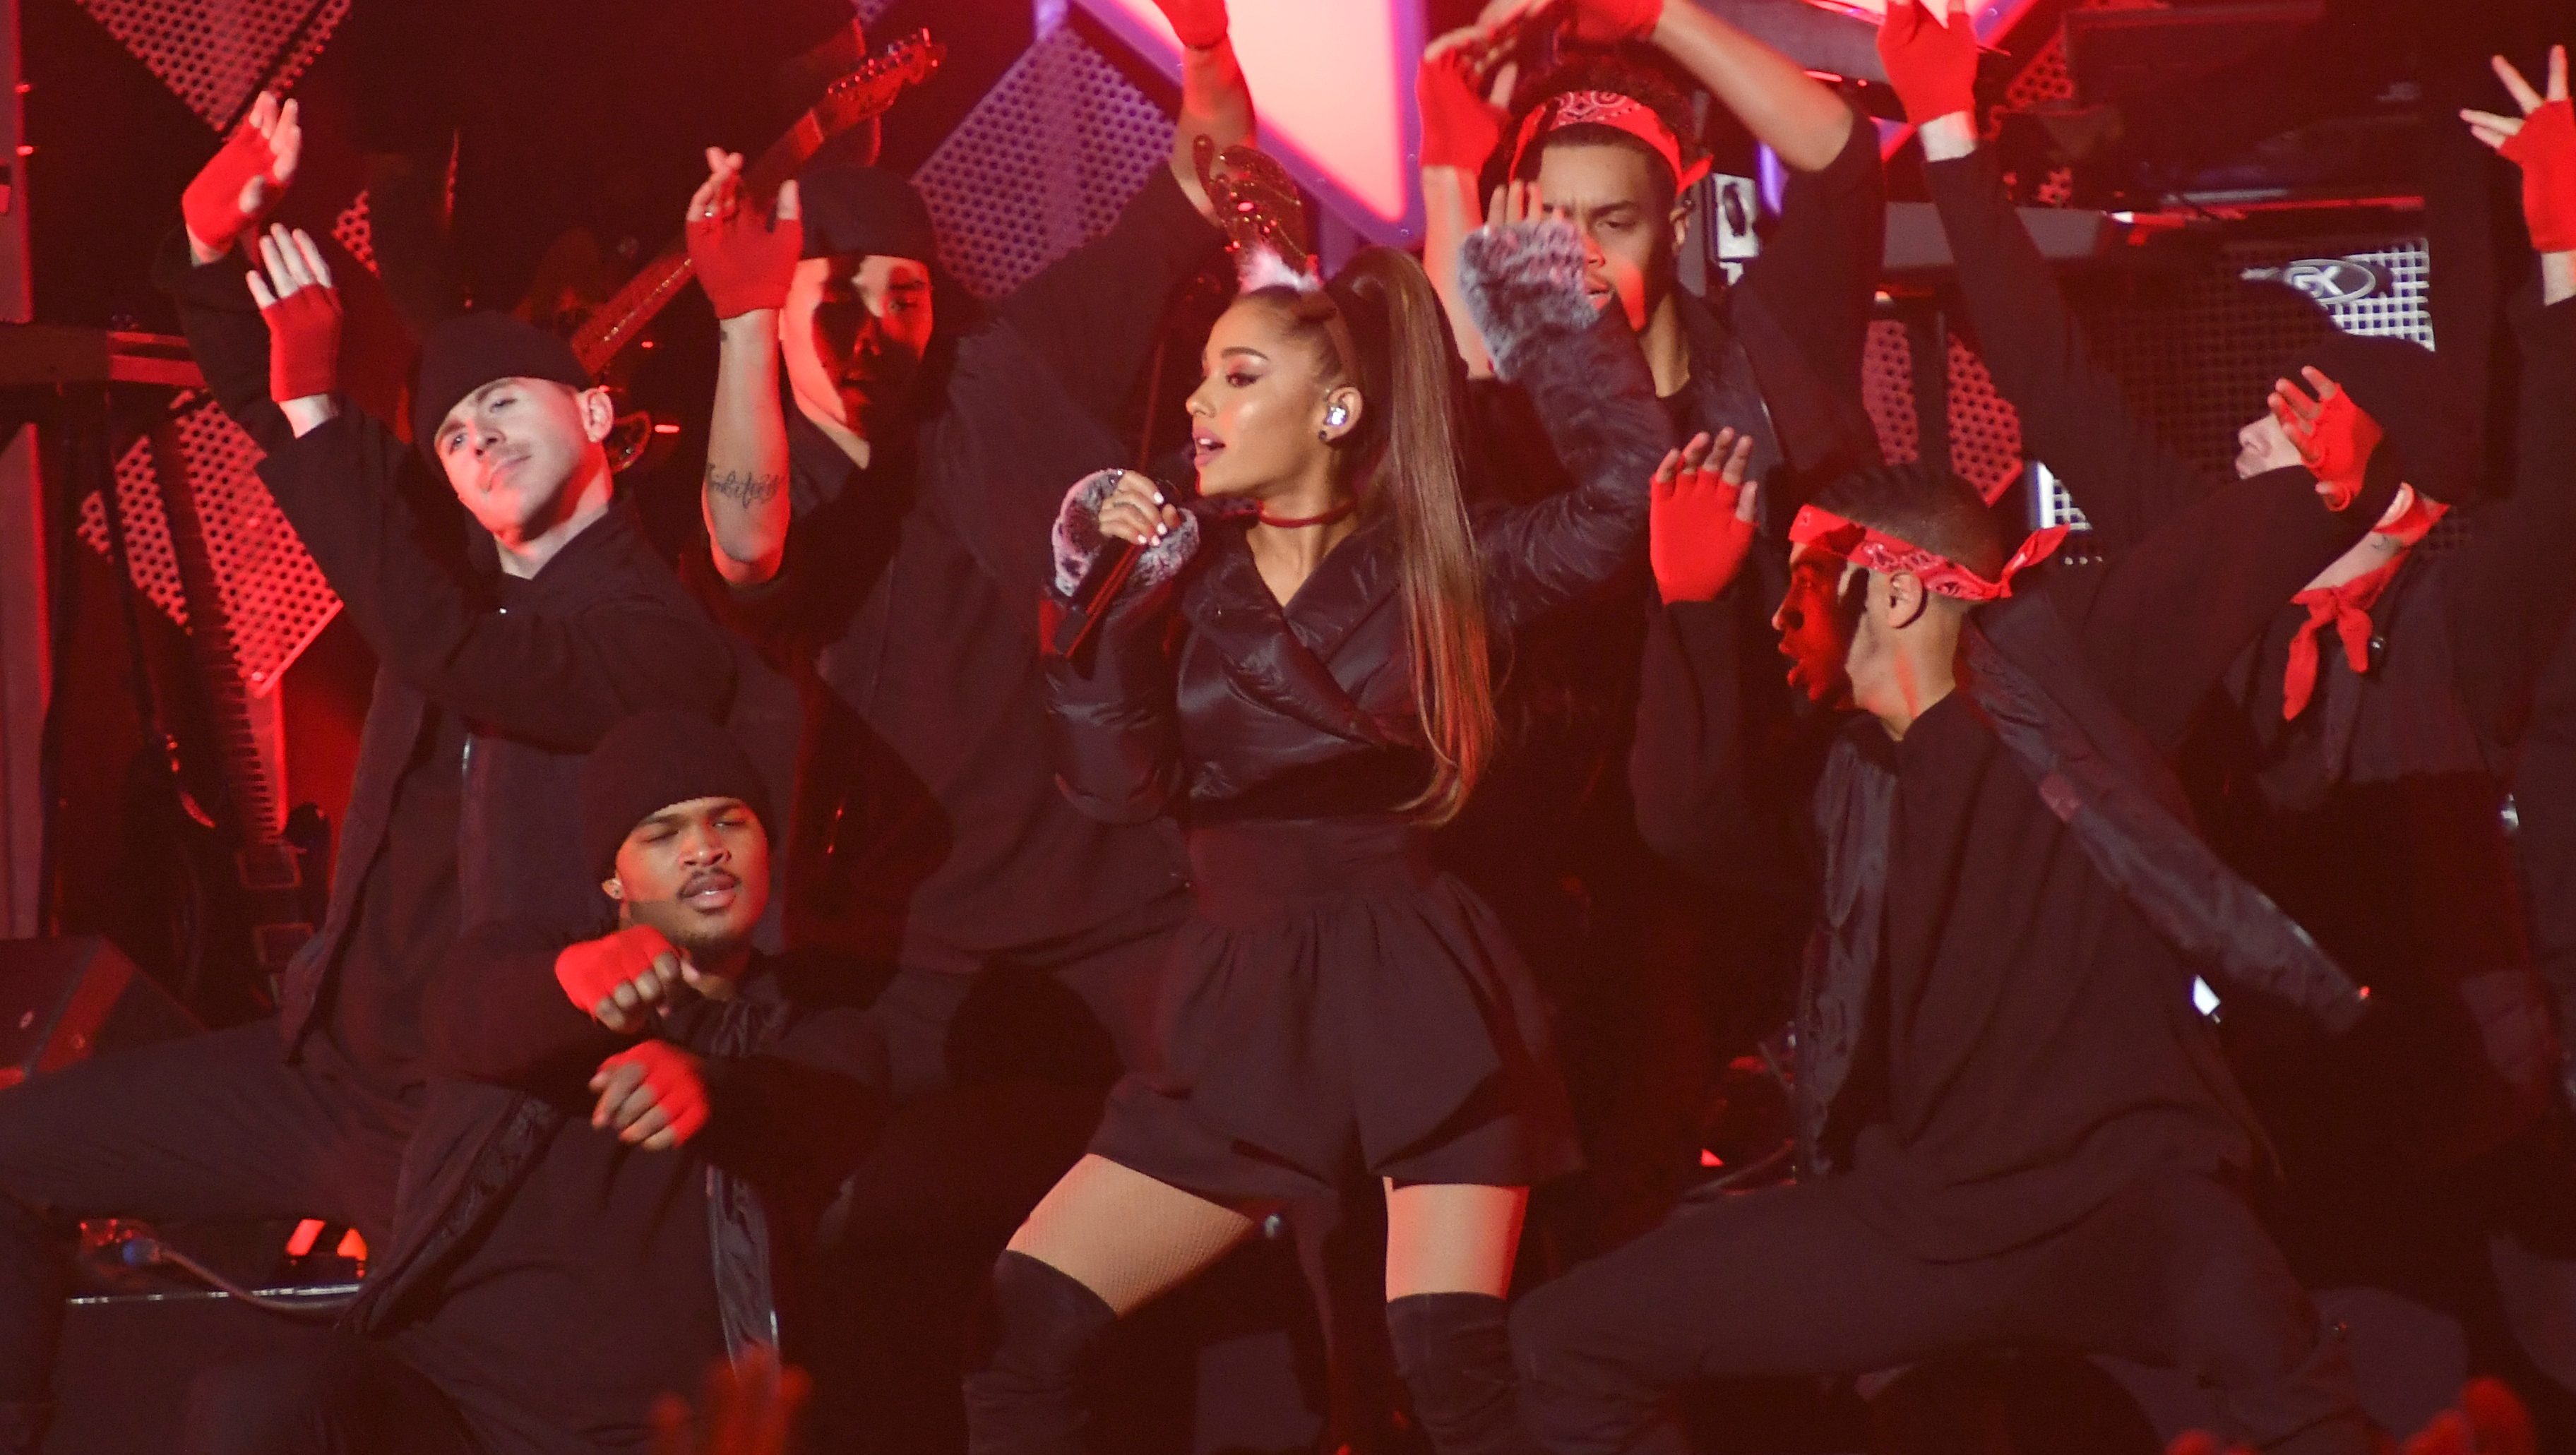 Ariana Grande Tour Dates Cancelled After Manchester Attack